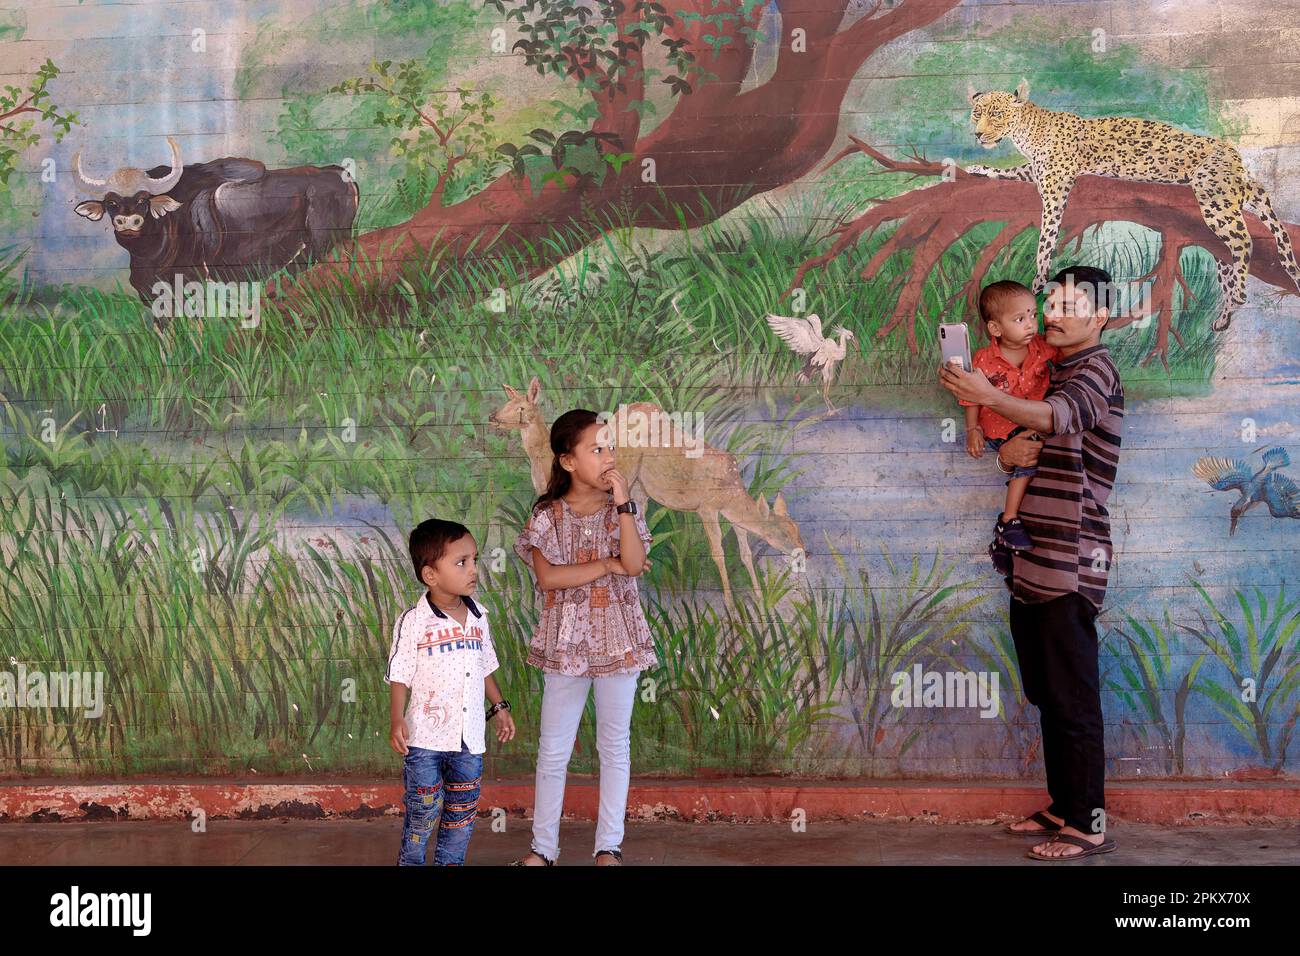 A father takes selfies with his children at a mural at Byculla Station in Mumbai, India, its wildlife theme a homage towards the nearby Byculla Zoo Stock Photo